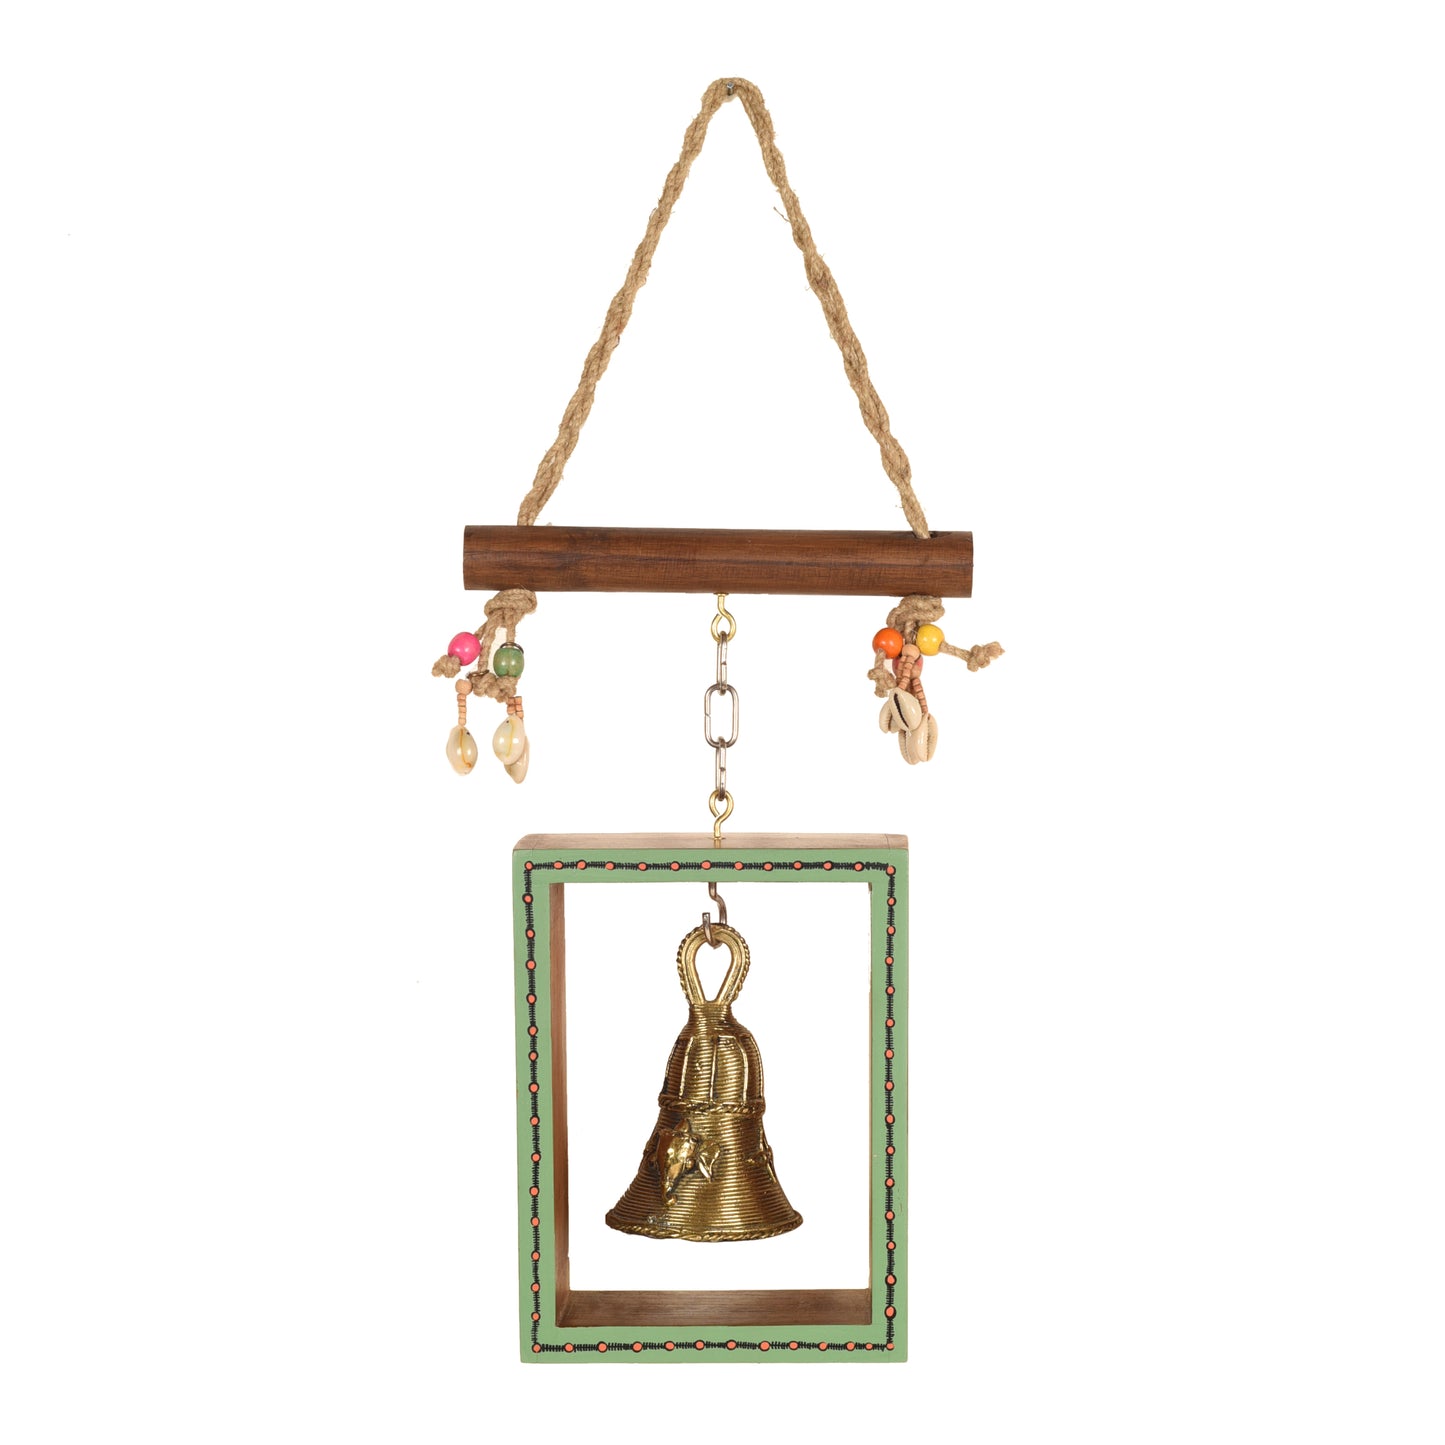 Handrcafted Windchime with Dhokra Bell